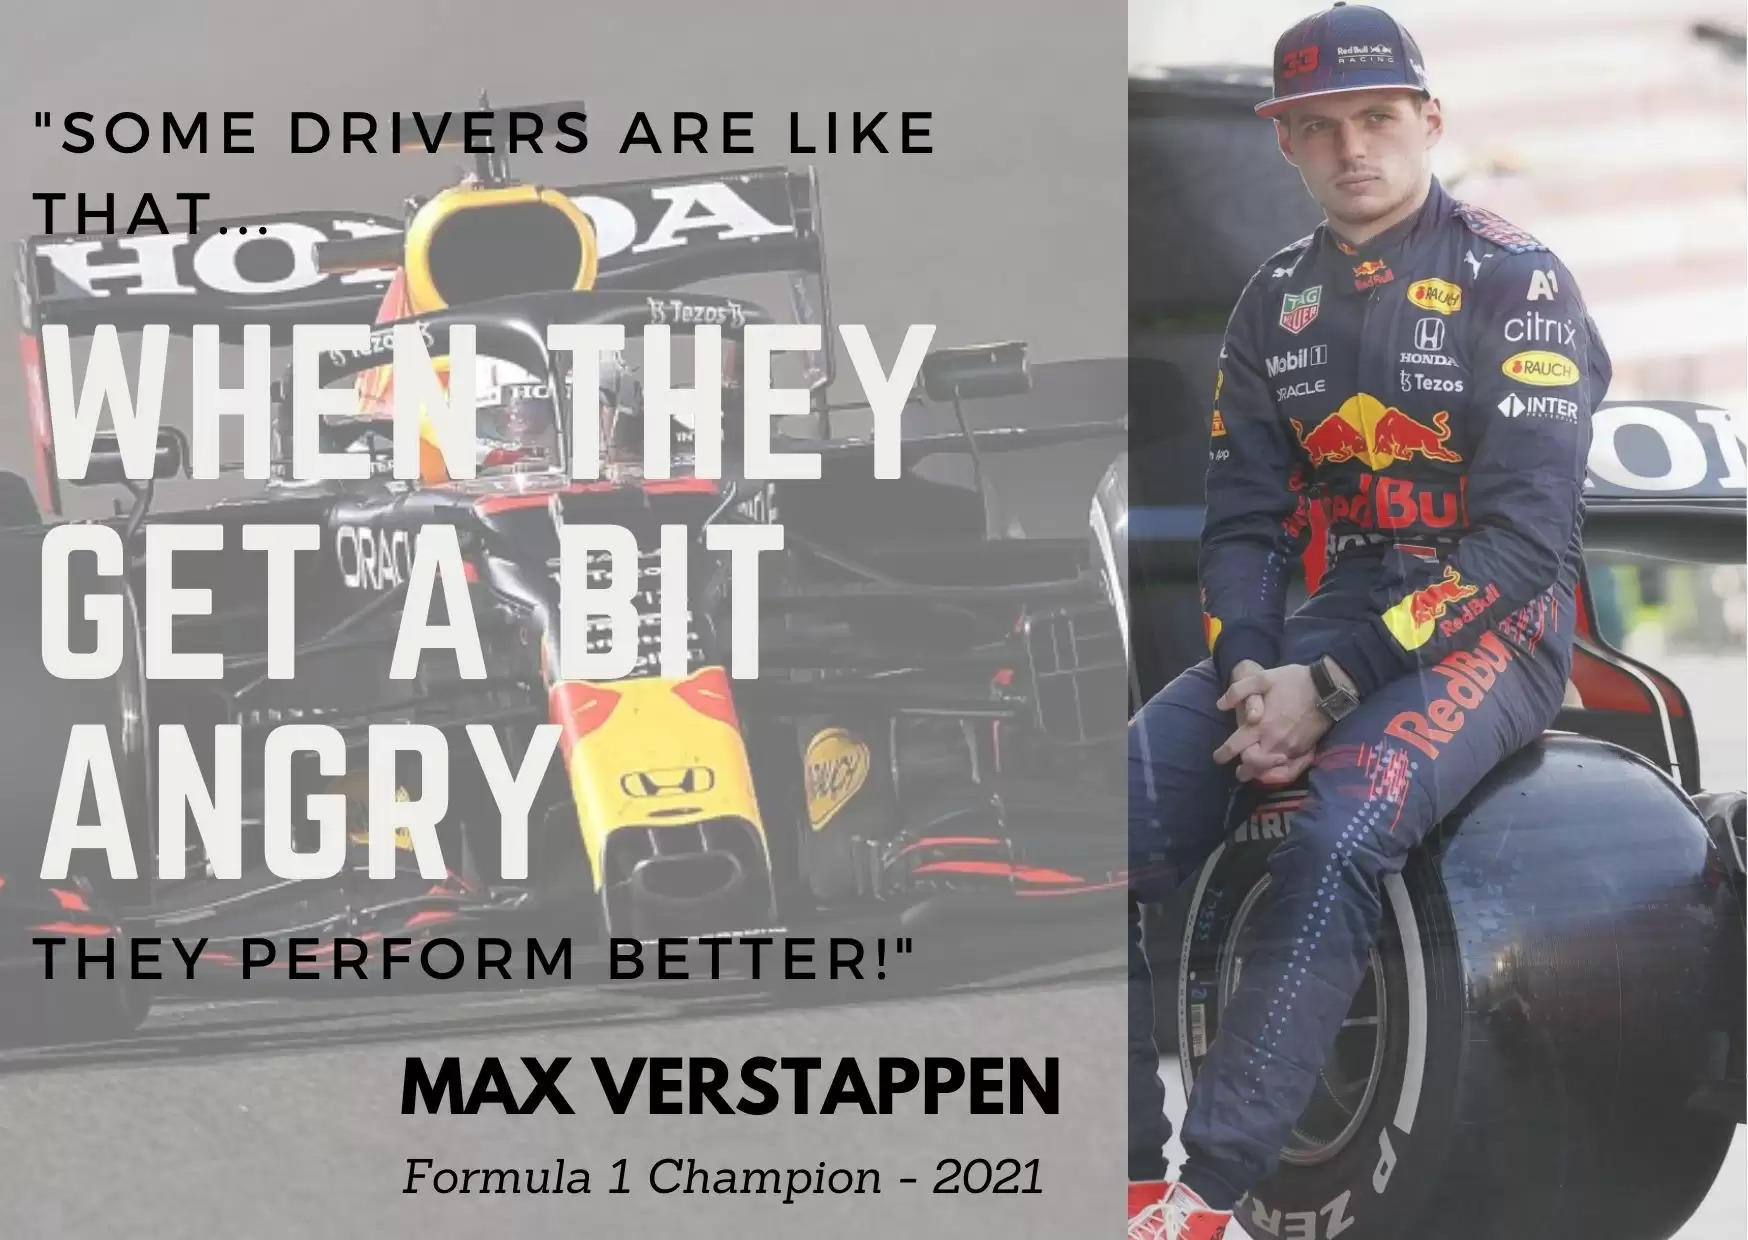 making a case for formula one in india my tryst with formula 1 writeup on formula one yas island abu dhabi max verstappen